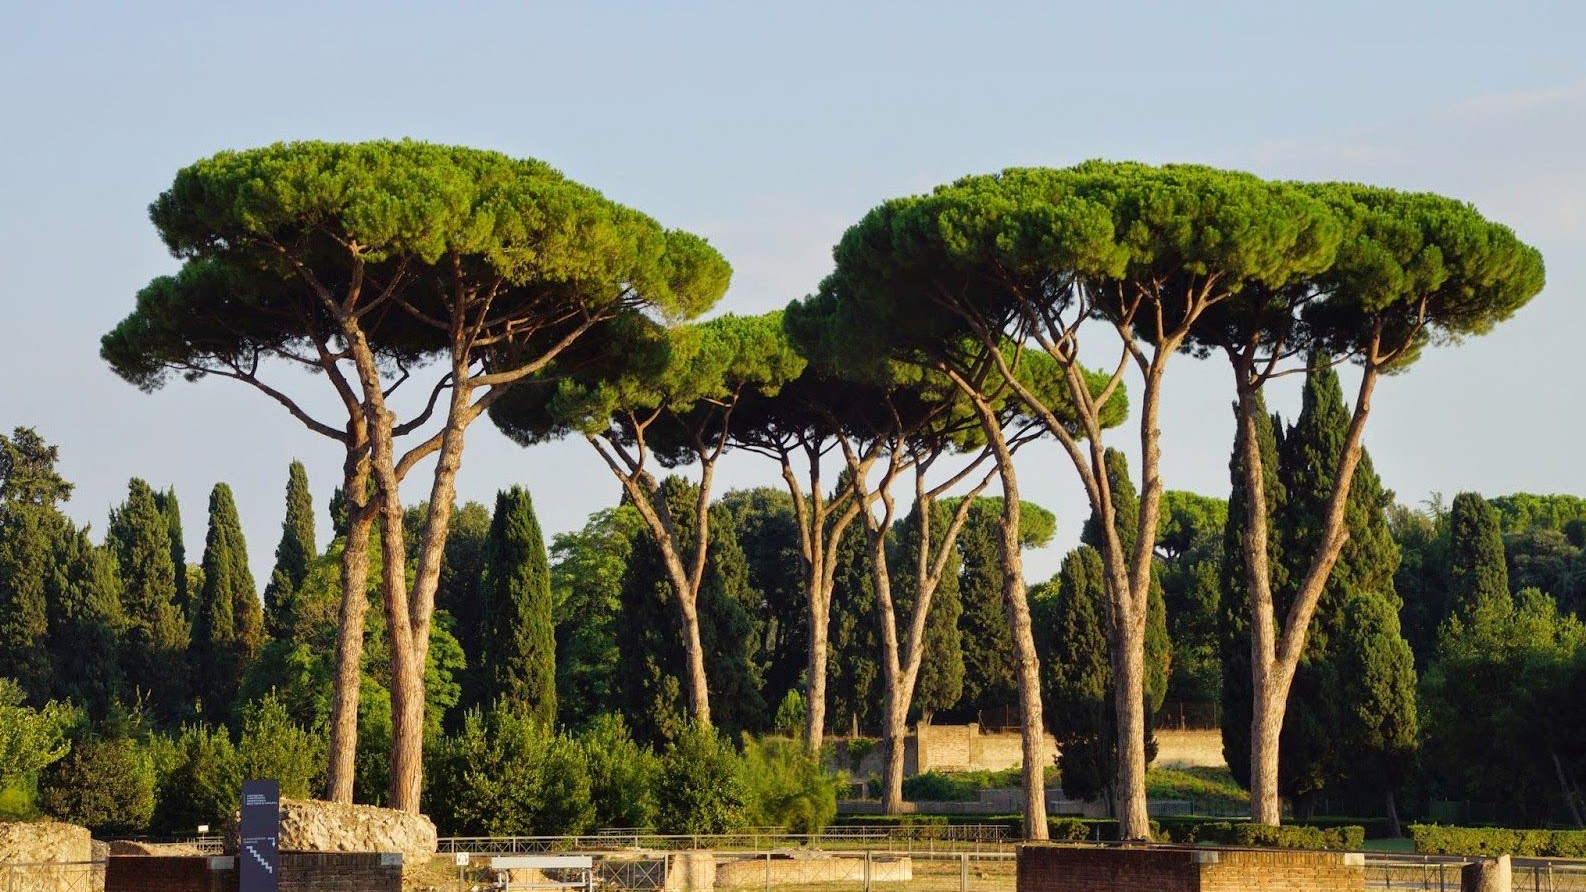 Pines of Rome